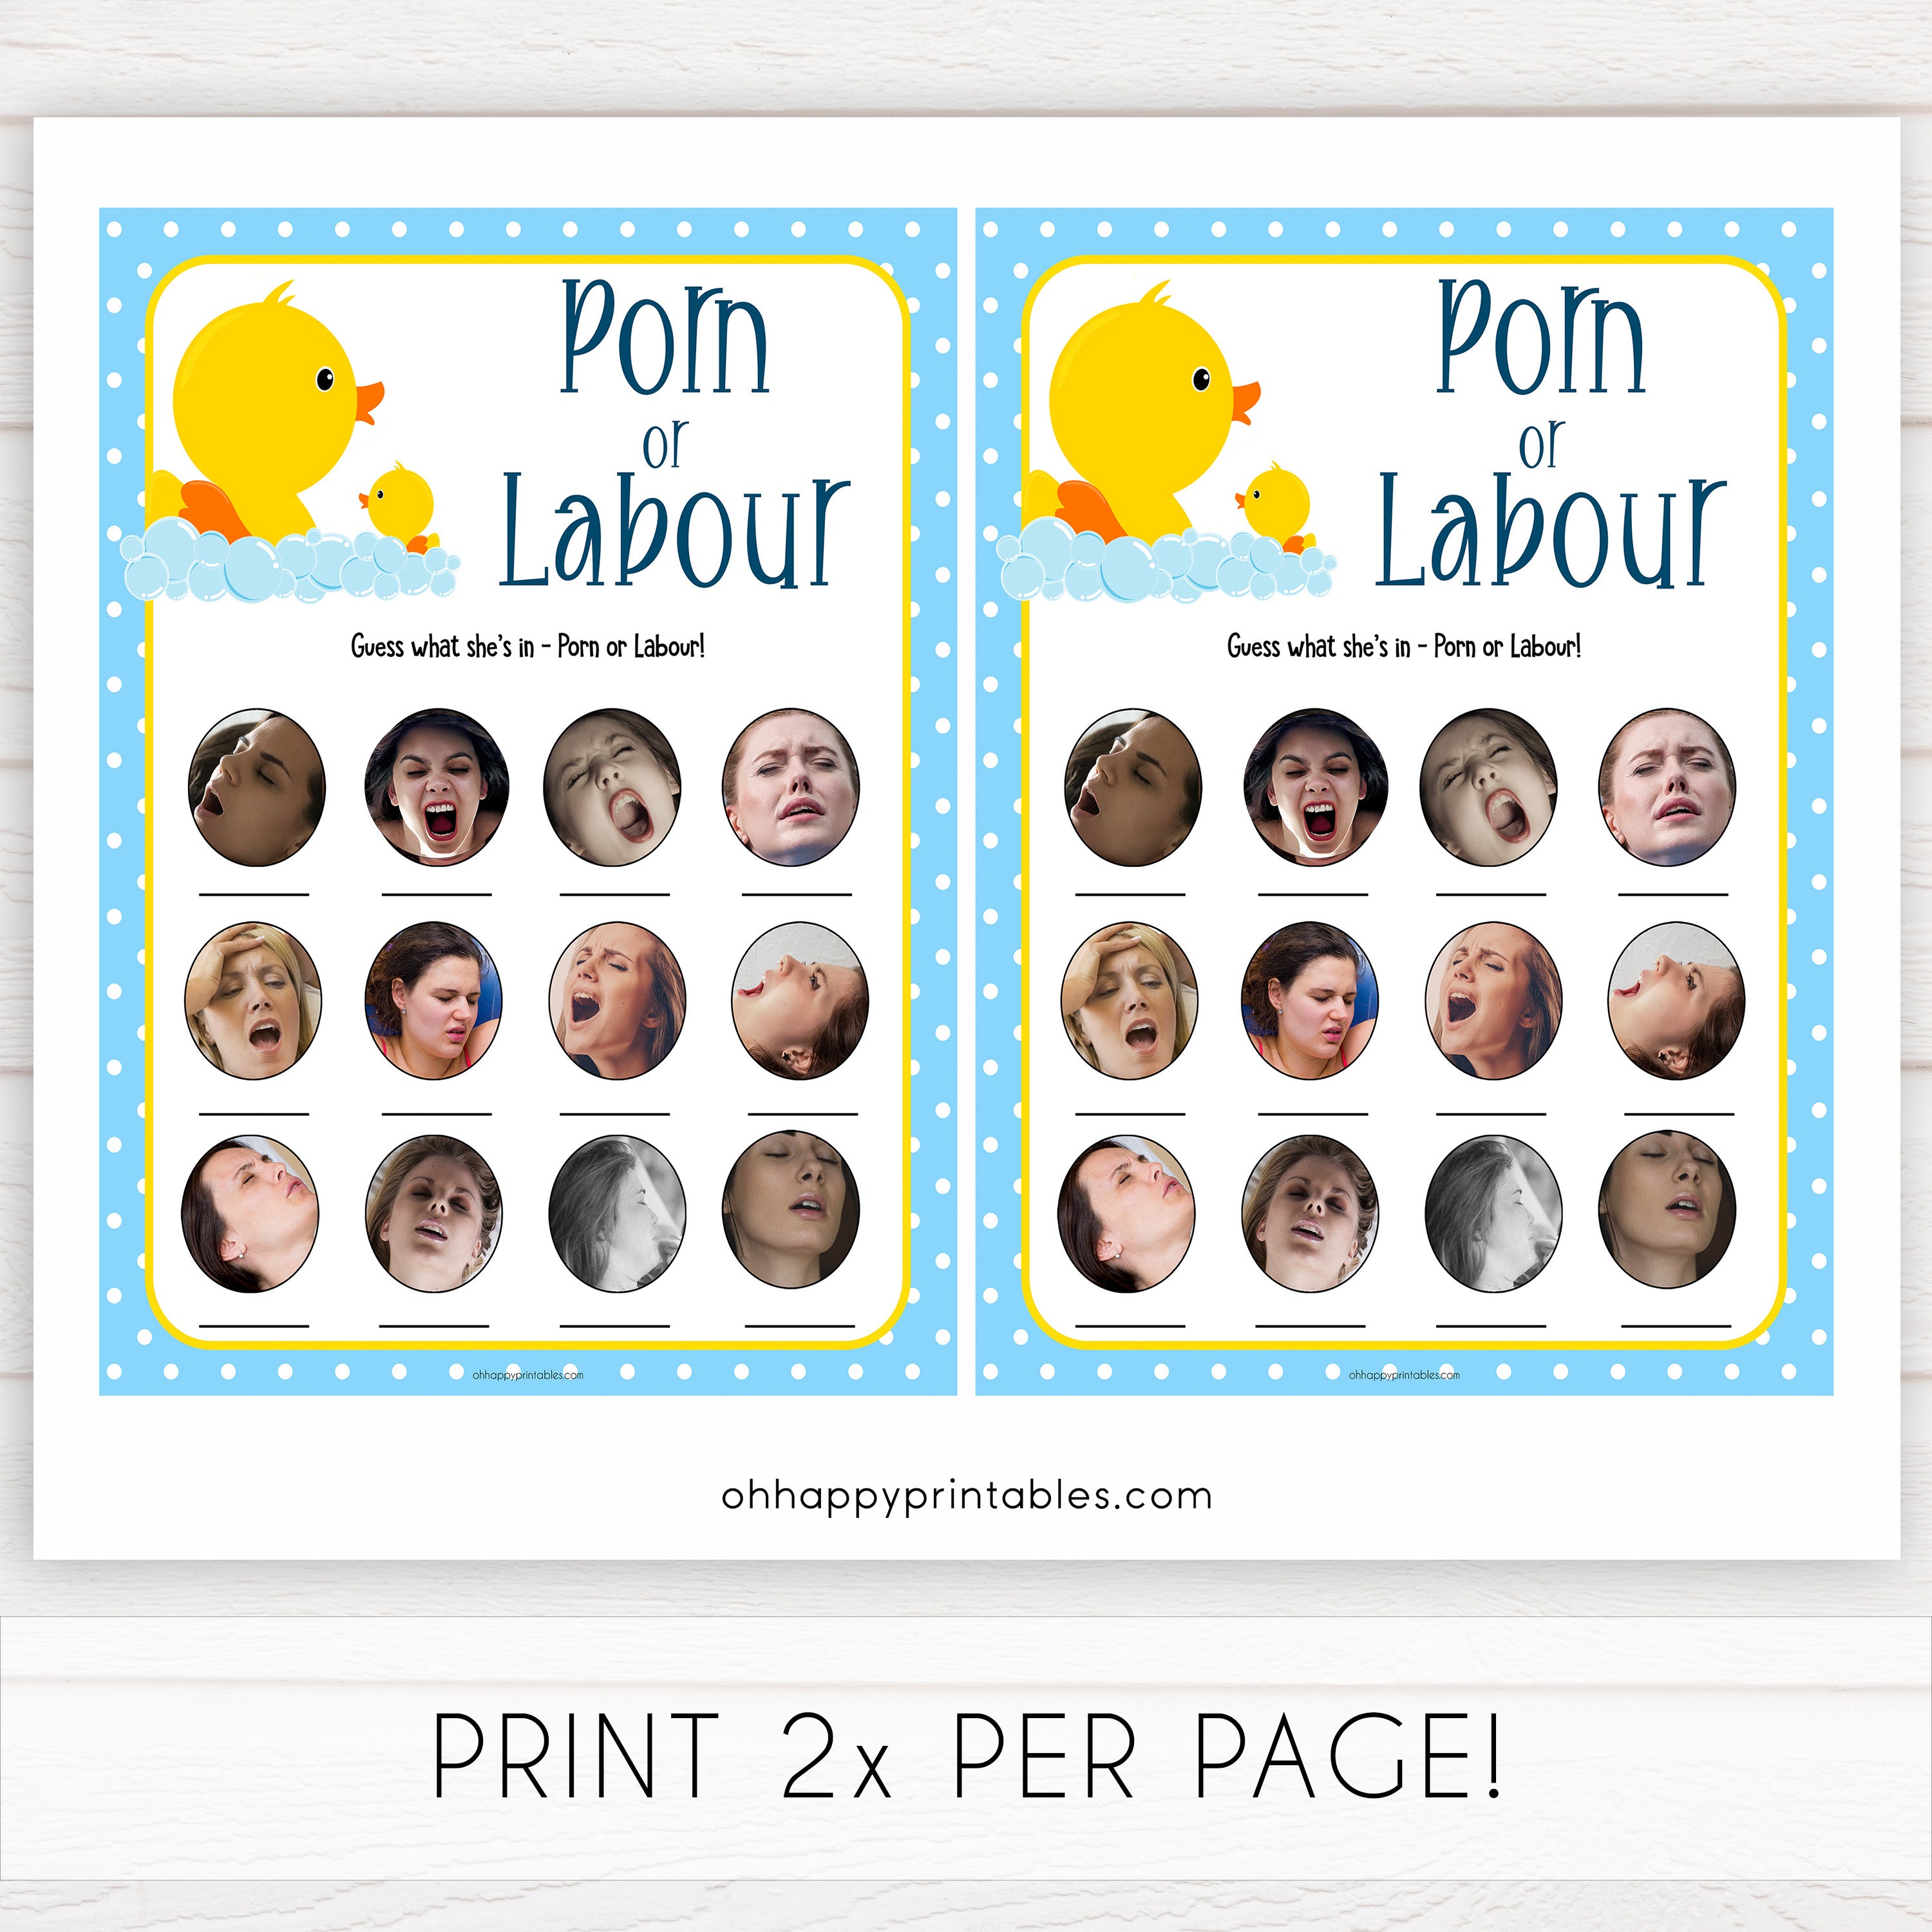 Porn Baby Shower - Porn or Labour Baby Shower Game - Rubber Ducky Printable Baby Games â€“  OhHappyPrintables